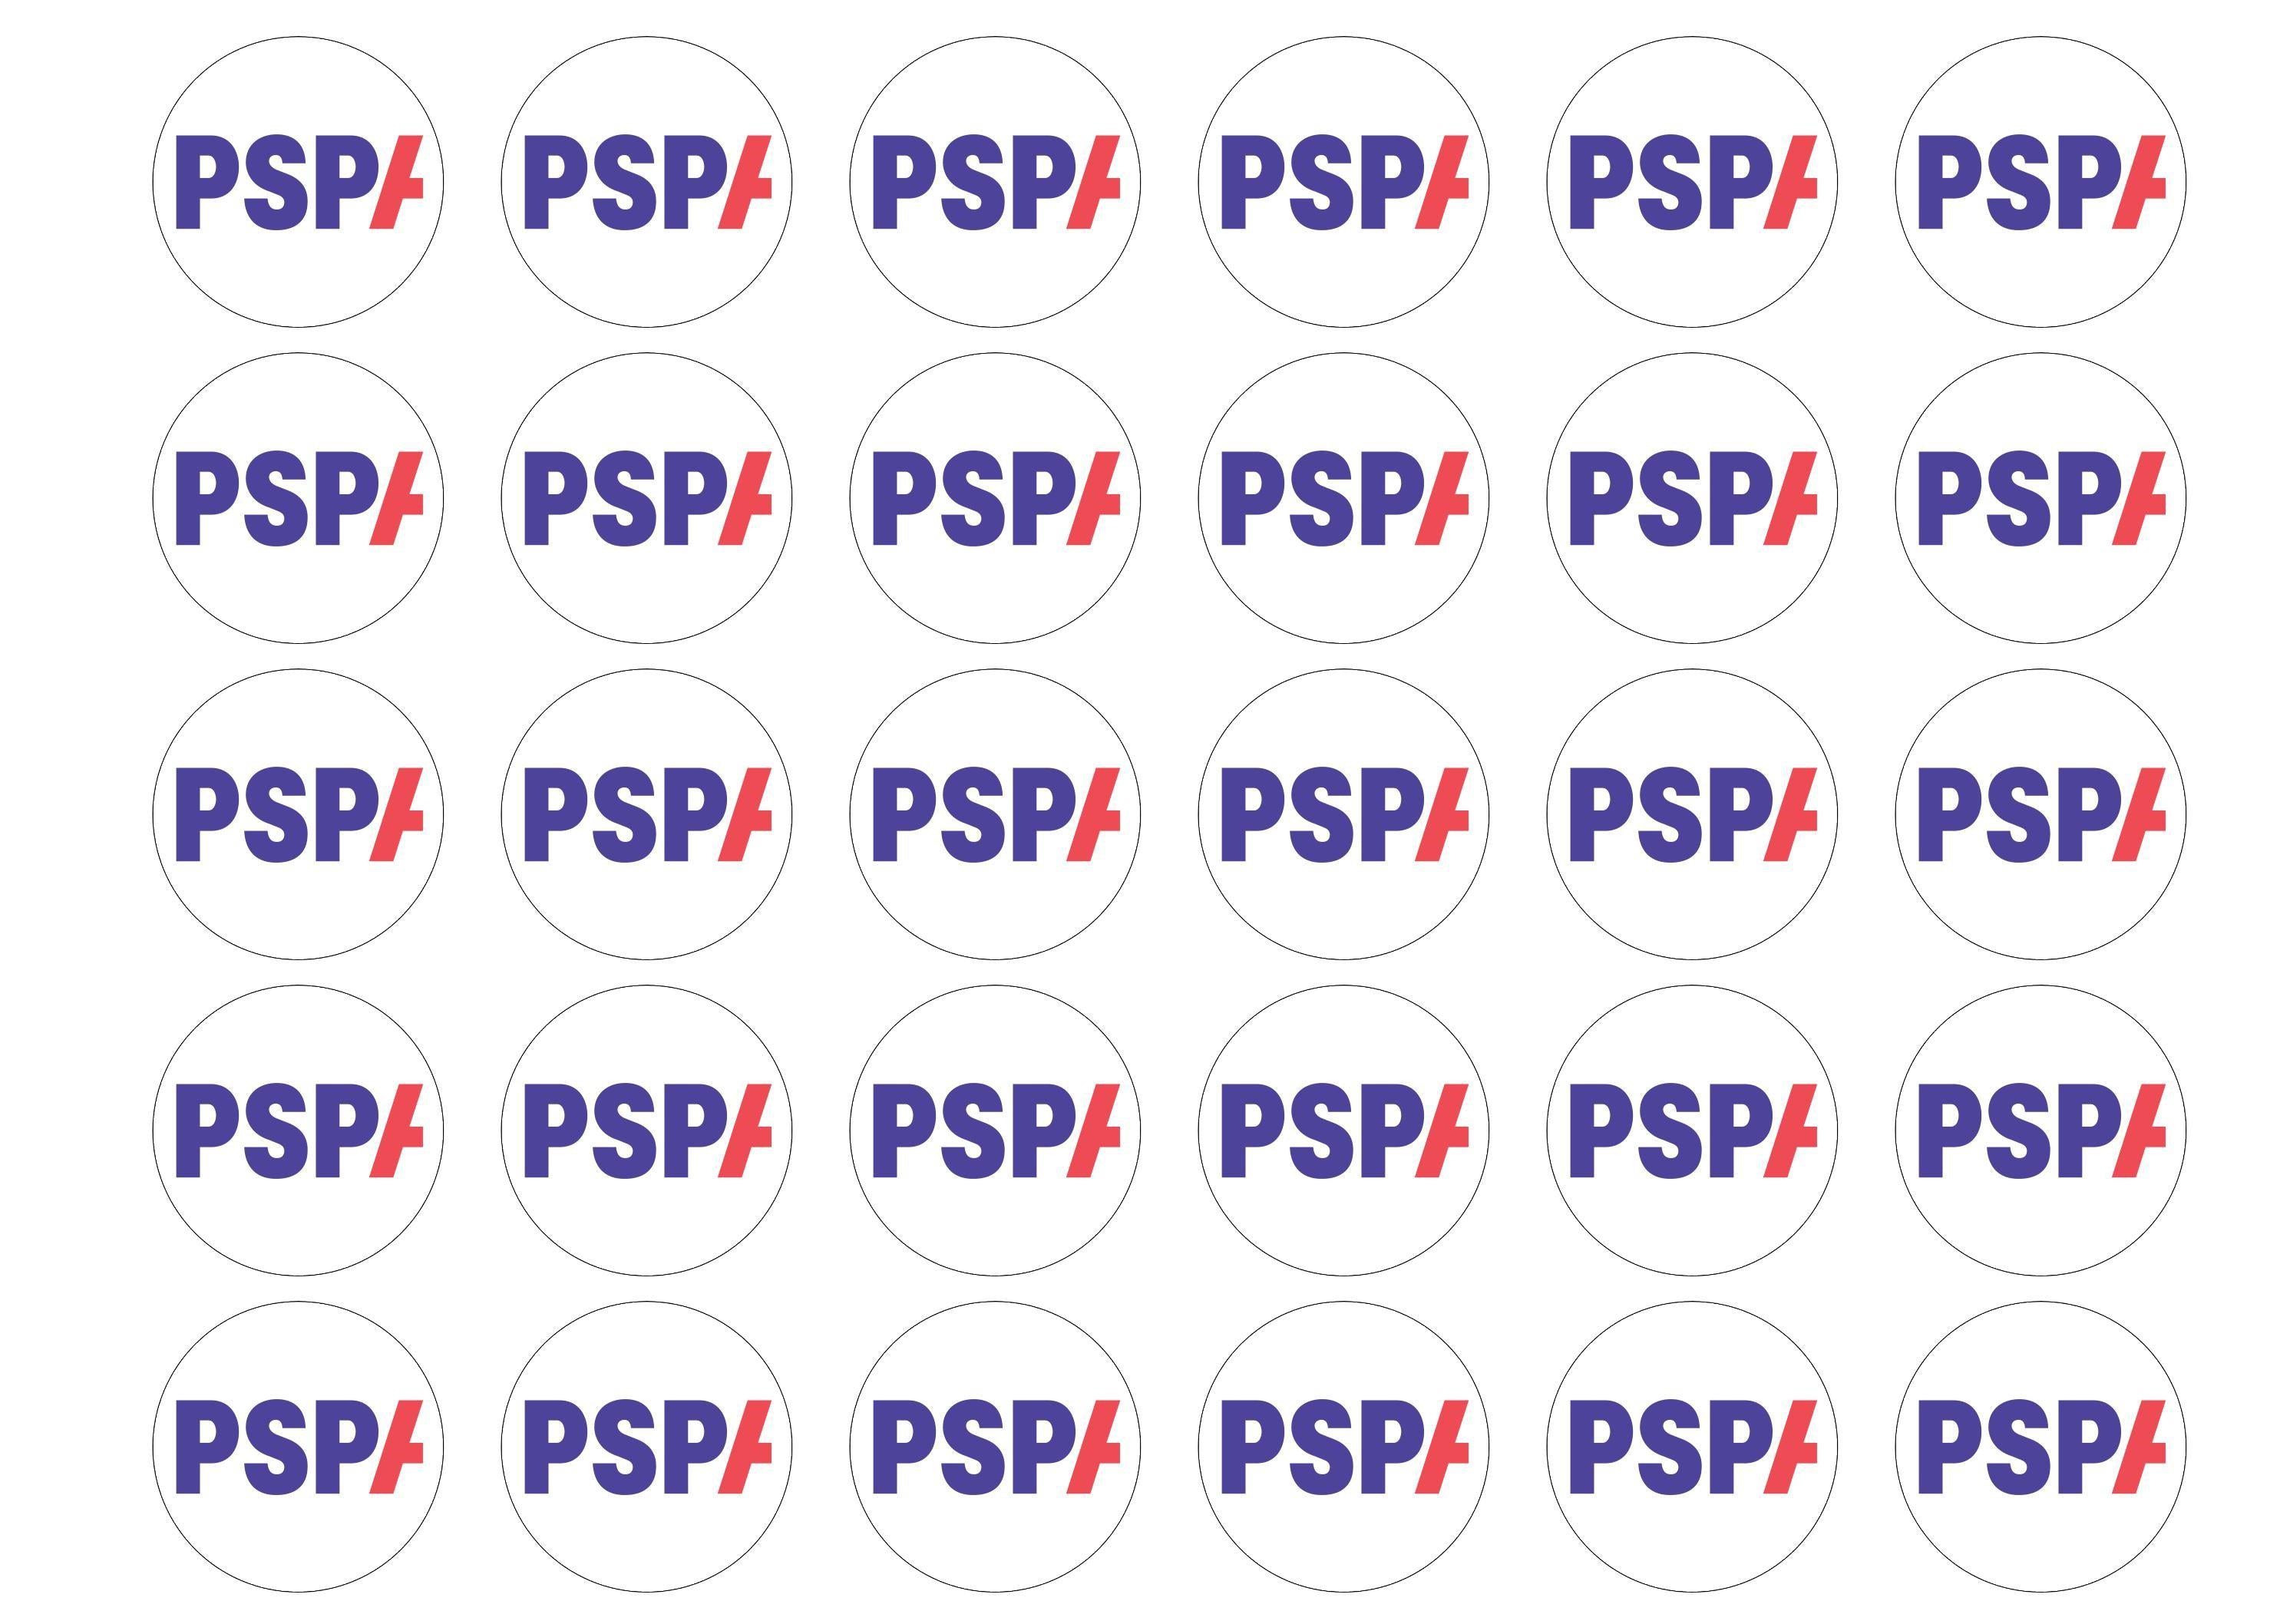 15 edible cupcake toppers with the PSPA charity logo